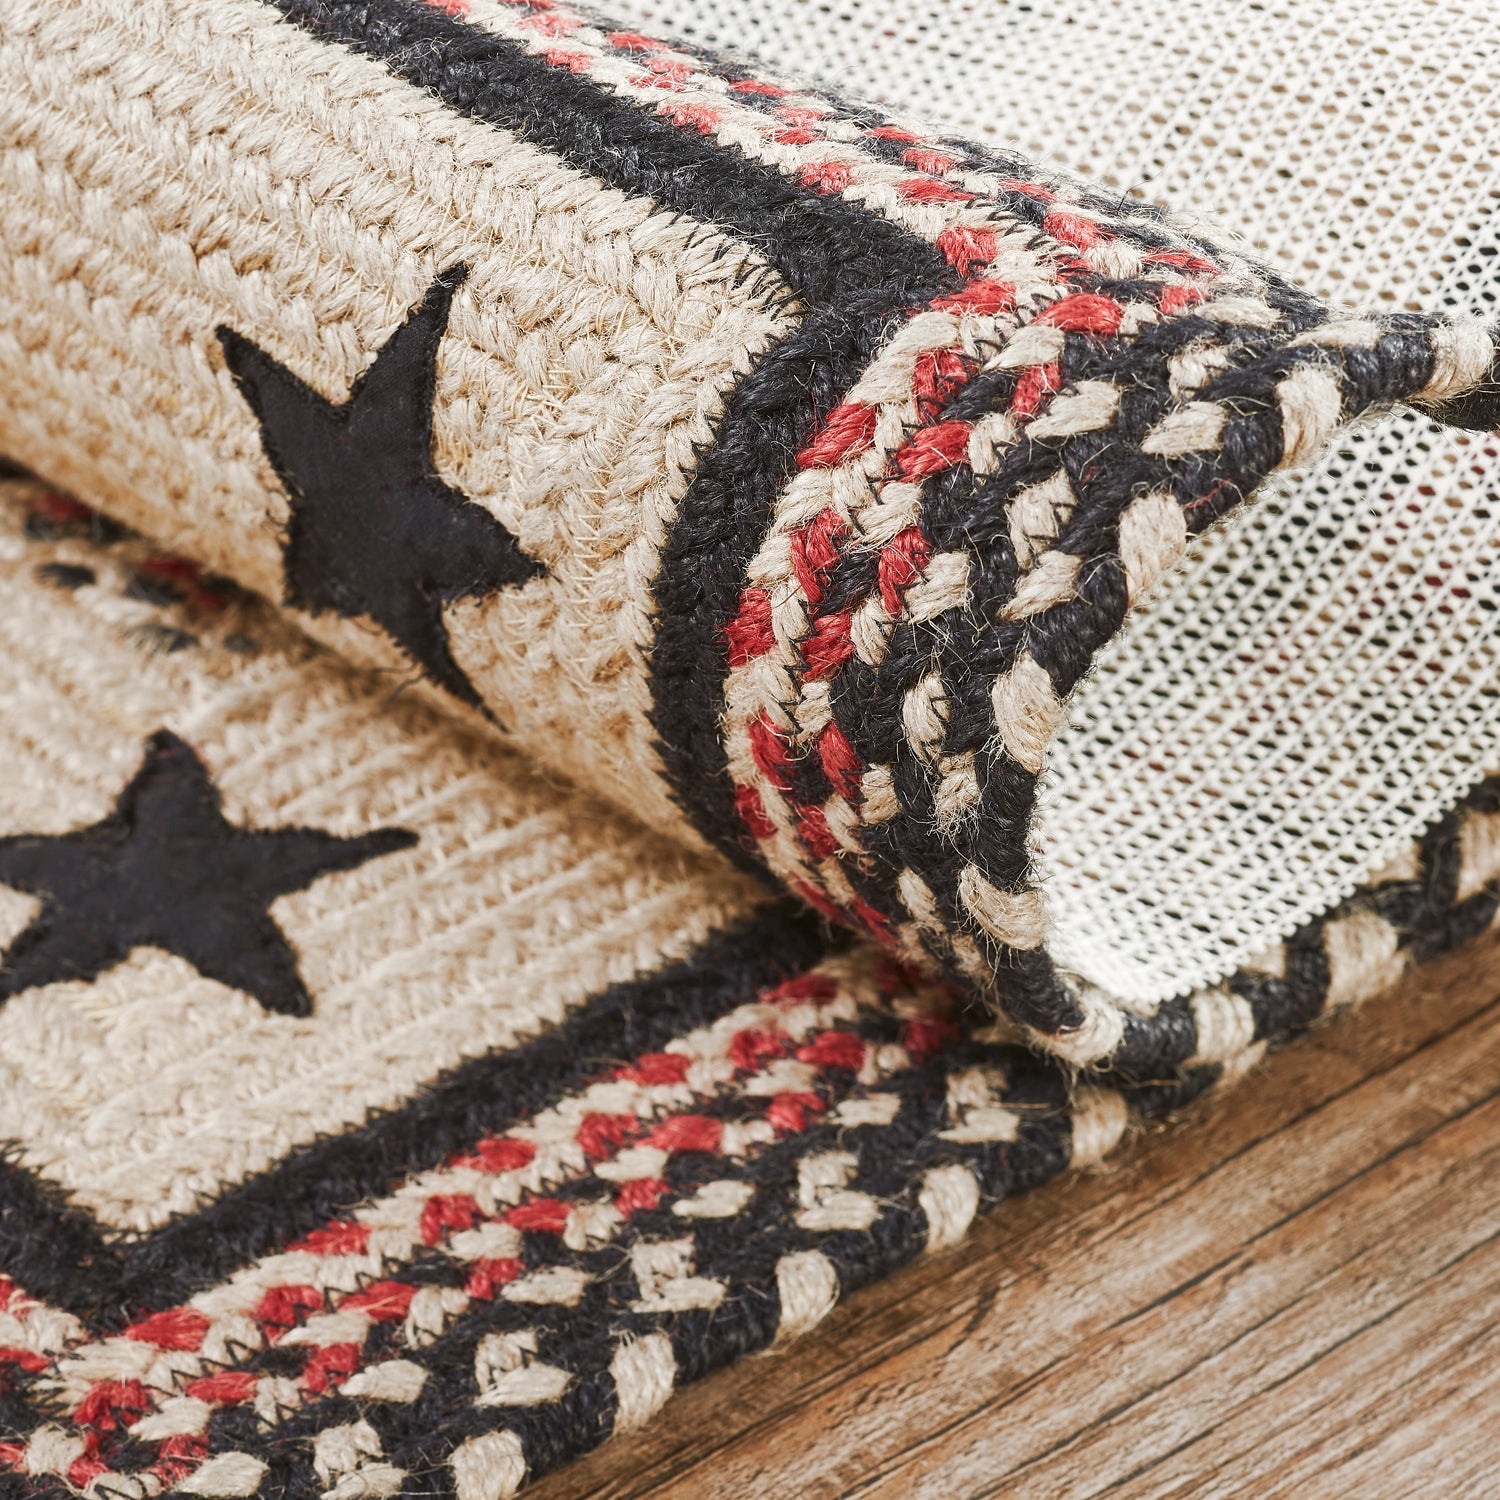 Colonial Star Jute Braided Rug Rect with Rug Pad 27"x48" VHC Brands